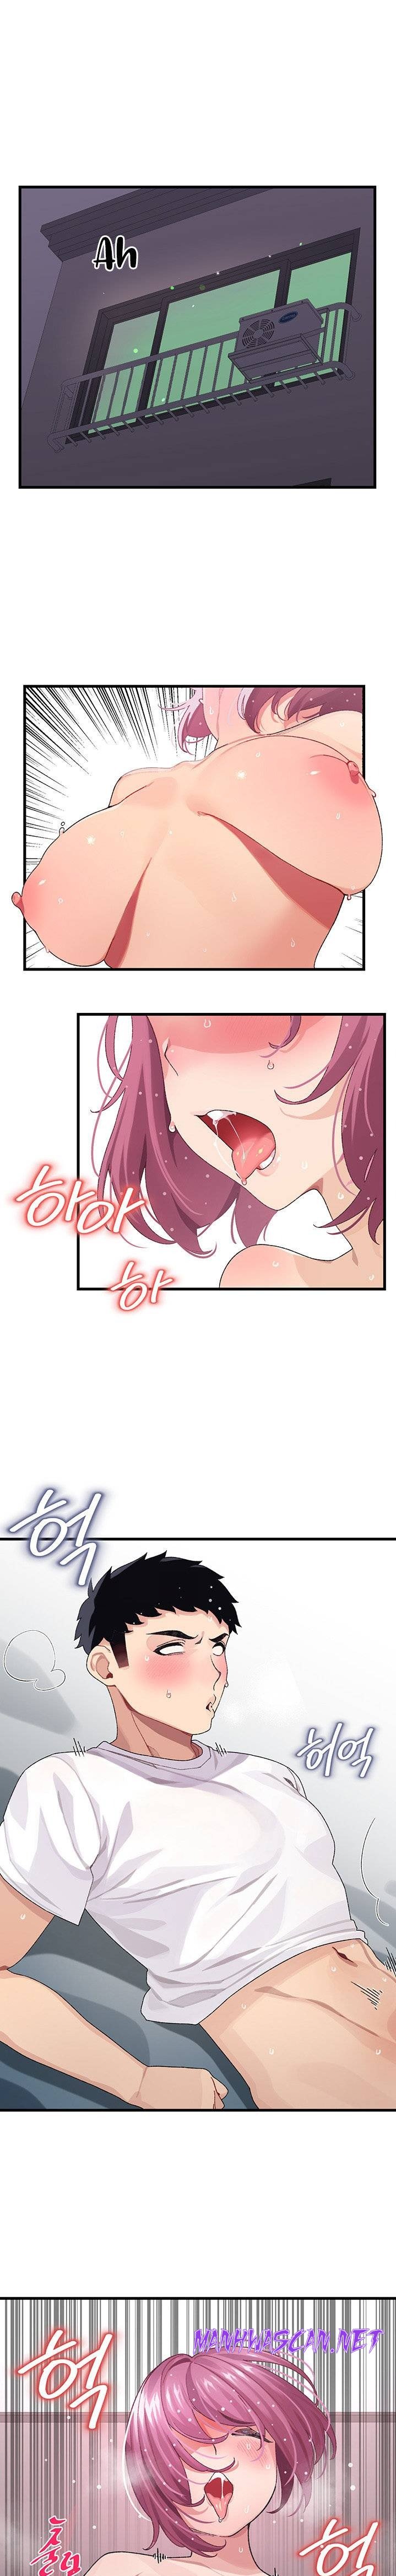 Bluetooth Love Raw - Chapter 1 Page 2